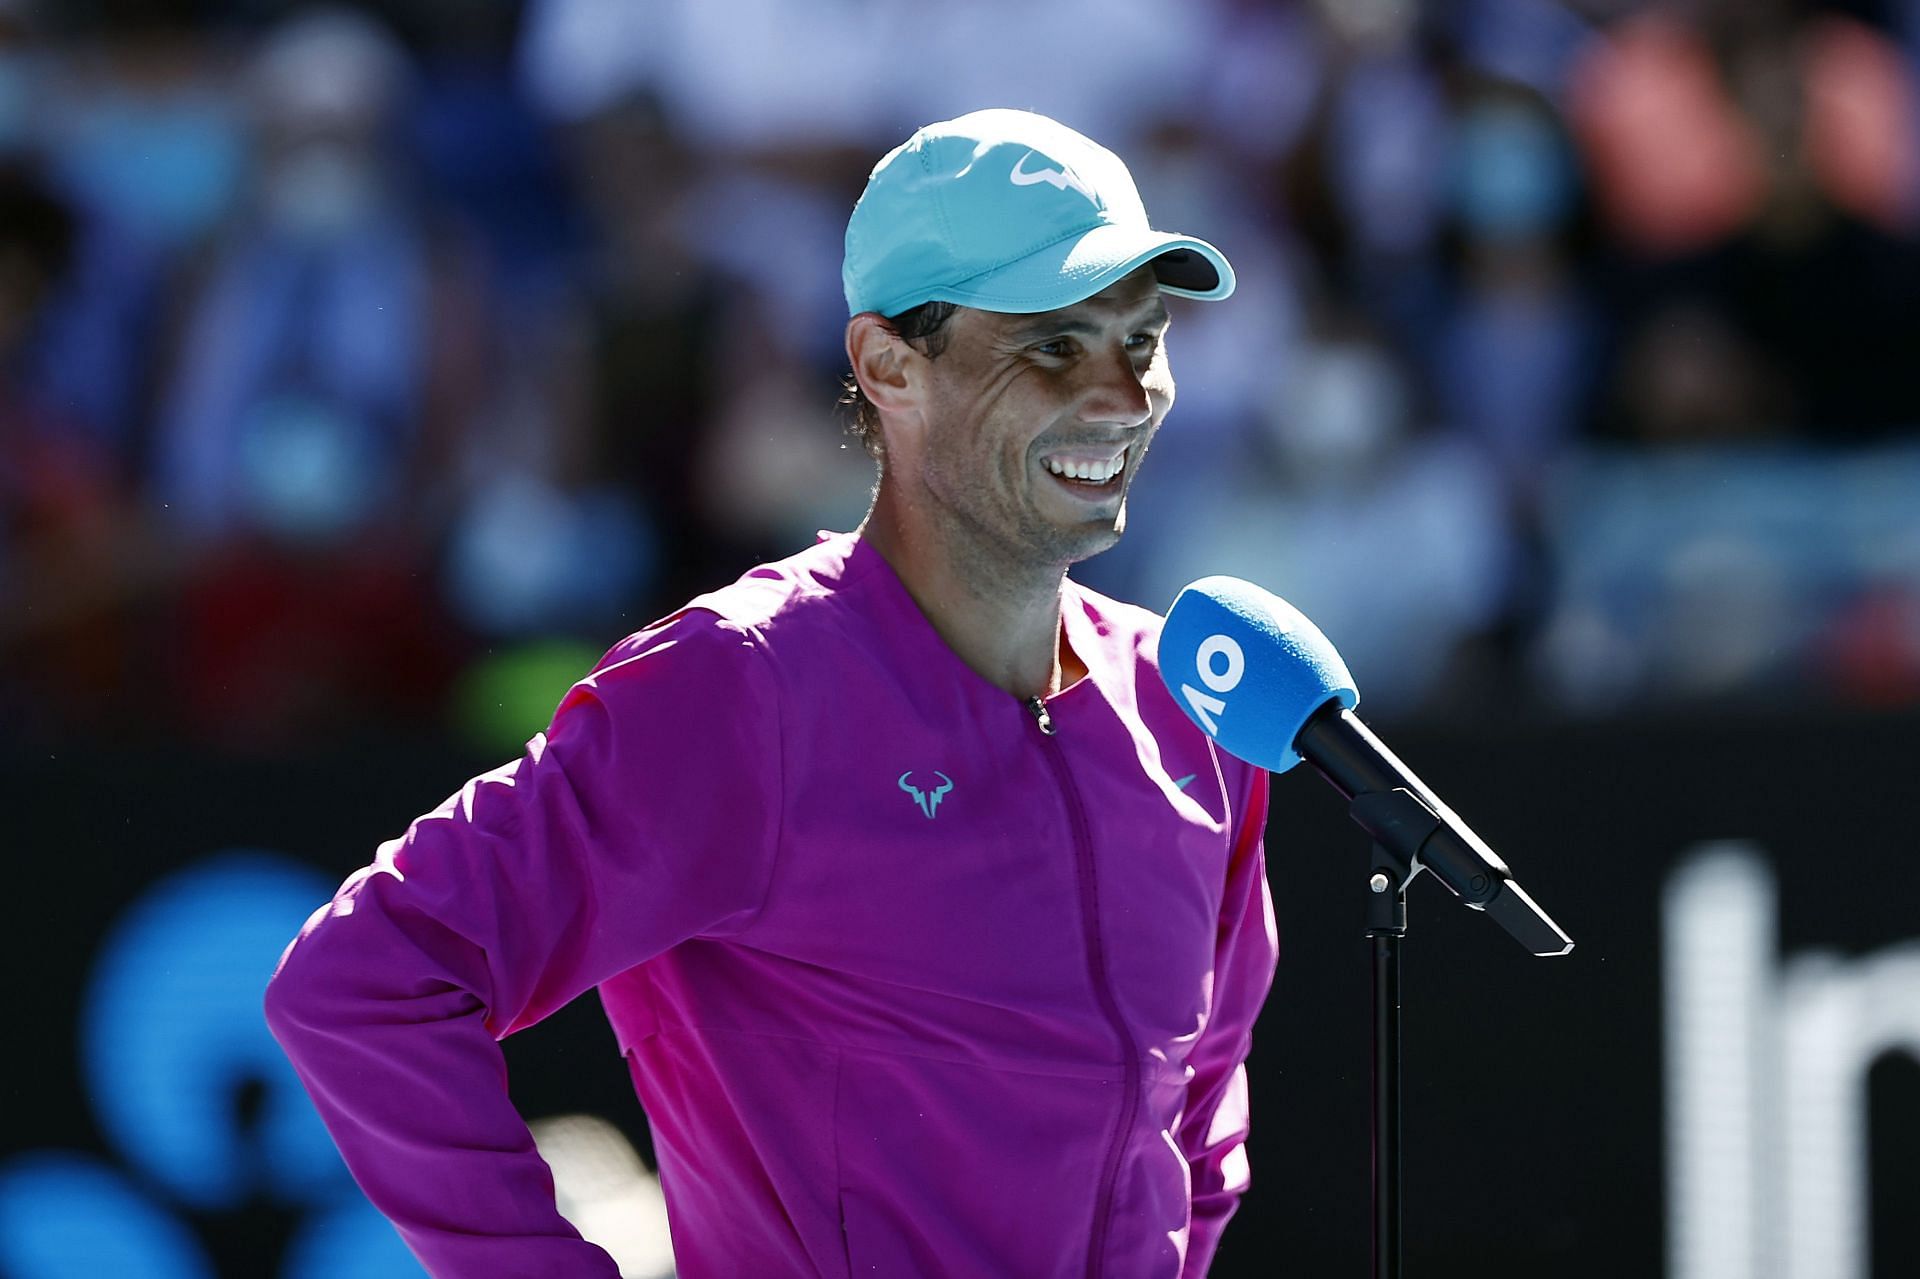 The Spaniard is interviewed after his second-round match at the 2022 Australian Open